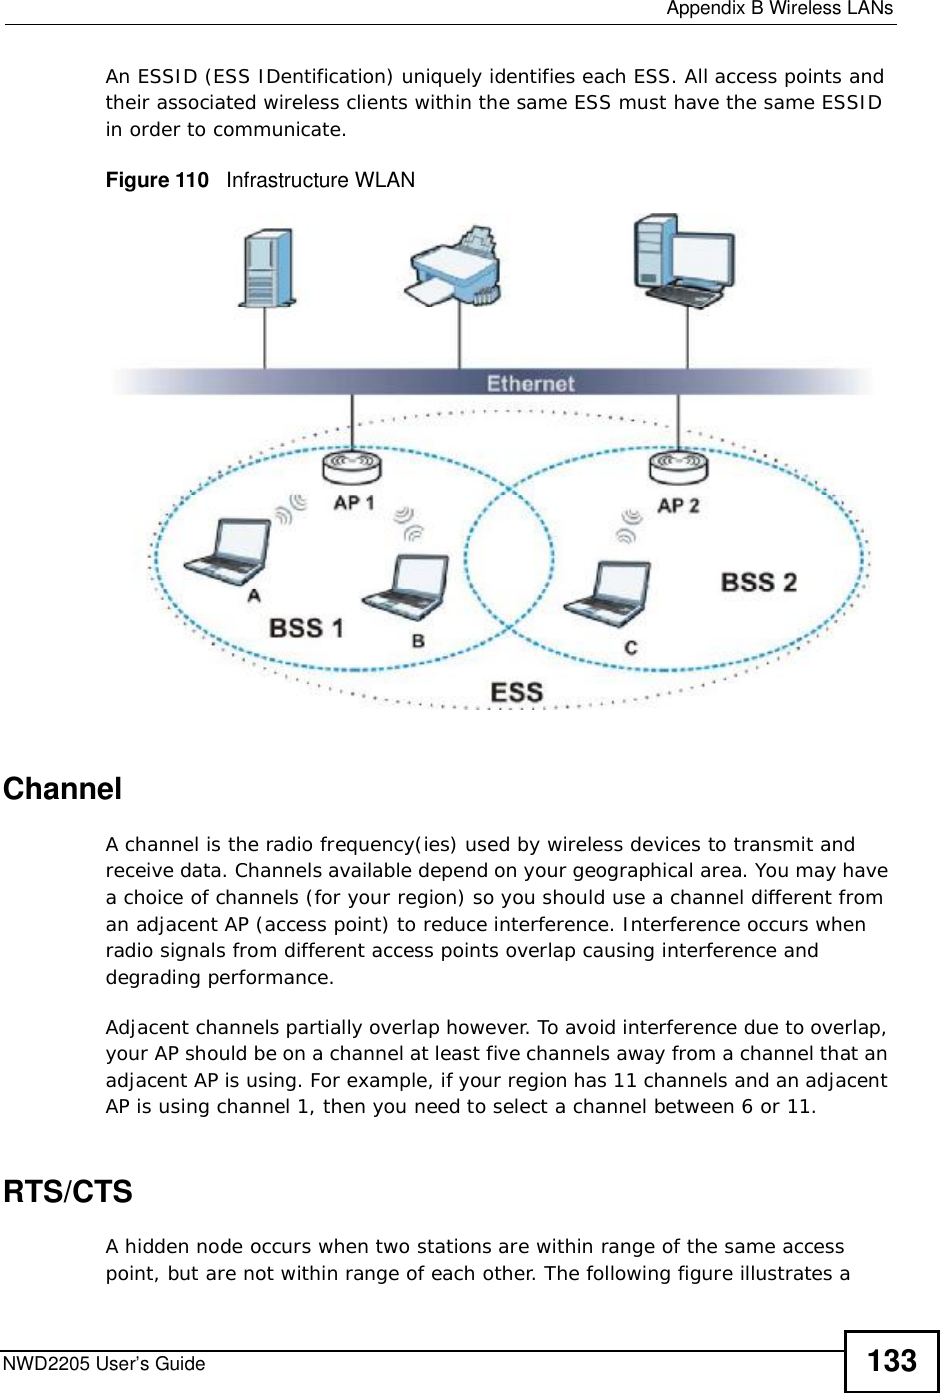  Appendix BWireless LANsNWD2205 User’s Guide 133An ESSID (ESS IDentification) uniquely identifies each ESS. All access points and their associated wireless clients within the same ESS must have the same ESSID in order to communicate.Figure 110   Infrastructure WLANChannelA channel is the radio frequency(ies) used by wireless devices to transmit and receive data. Channels available depend on your geographical area. You may have a choice of channels (for your region) so you should use a channel different from an adjacent AP (access point) to reduce interference. Interference occurs when radio signals from different access points overlap causing interference and degrading performance.Adjacent channels partially overlap however. To avoid interference due to overlap, your AP should be on a channel at least five channels away from a channel that an adjacent AP is using. For example, if your region has 11 channels and an adjacent AP is using channel 1, then you need to select a channel between 6 or 11.RTS/CTSA hidden node occurs when two stations are within range of the same access point, but are not within range of each other. The following figure illustrates a 